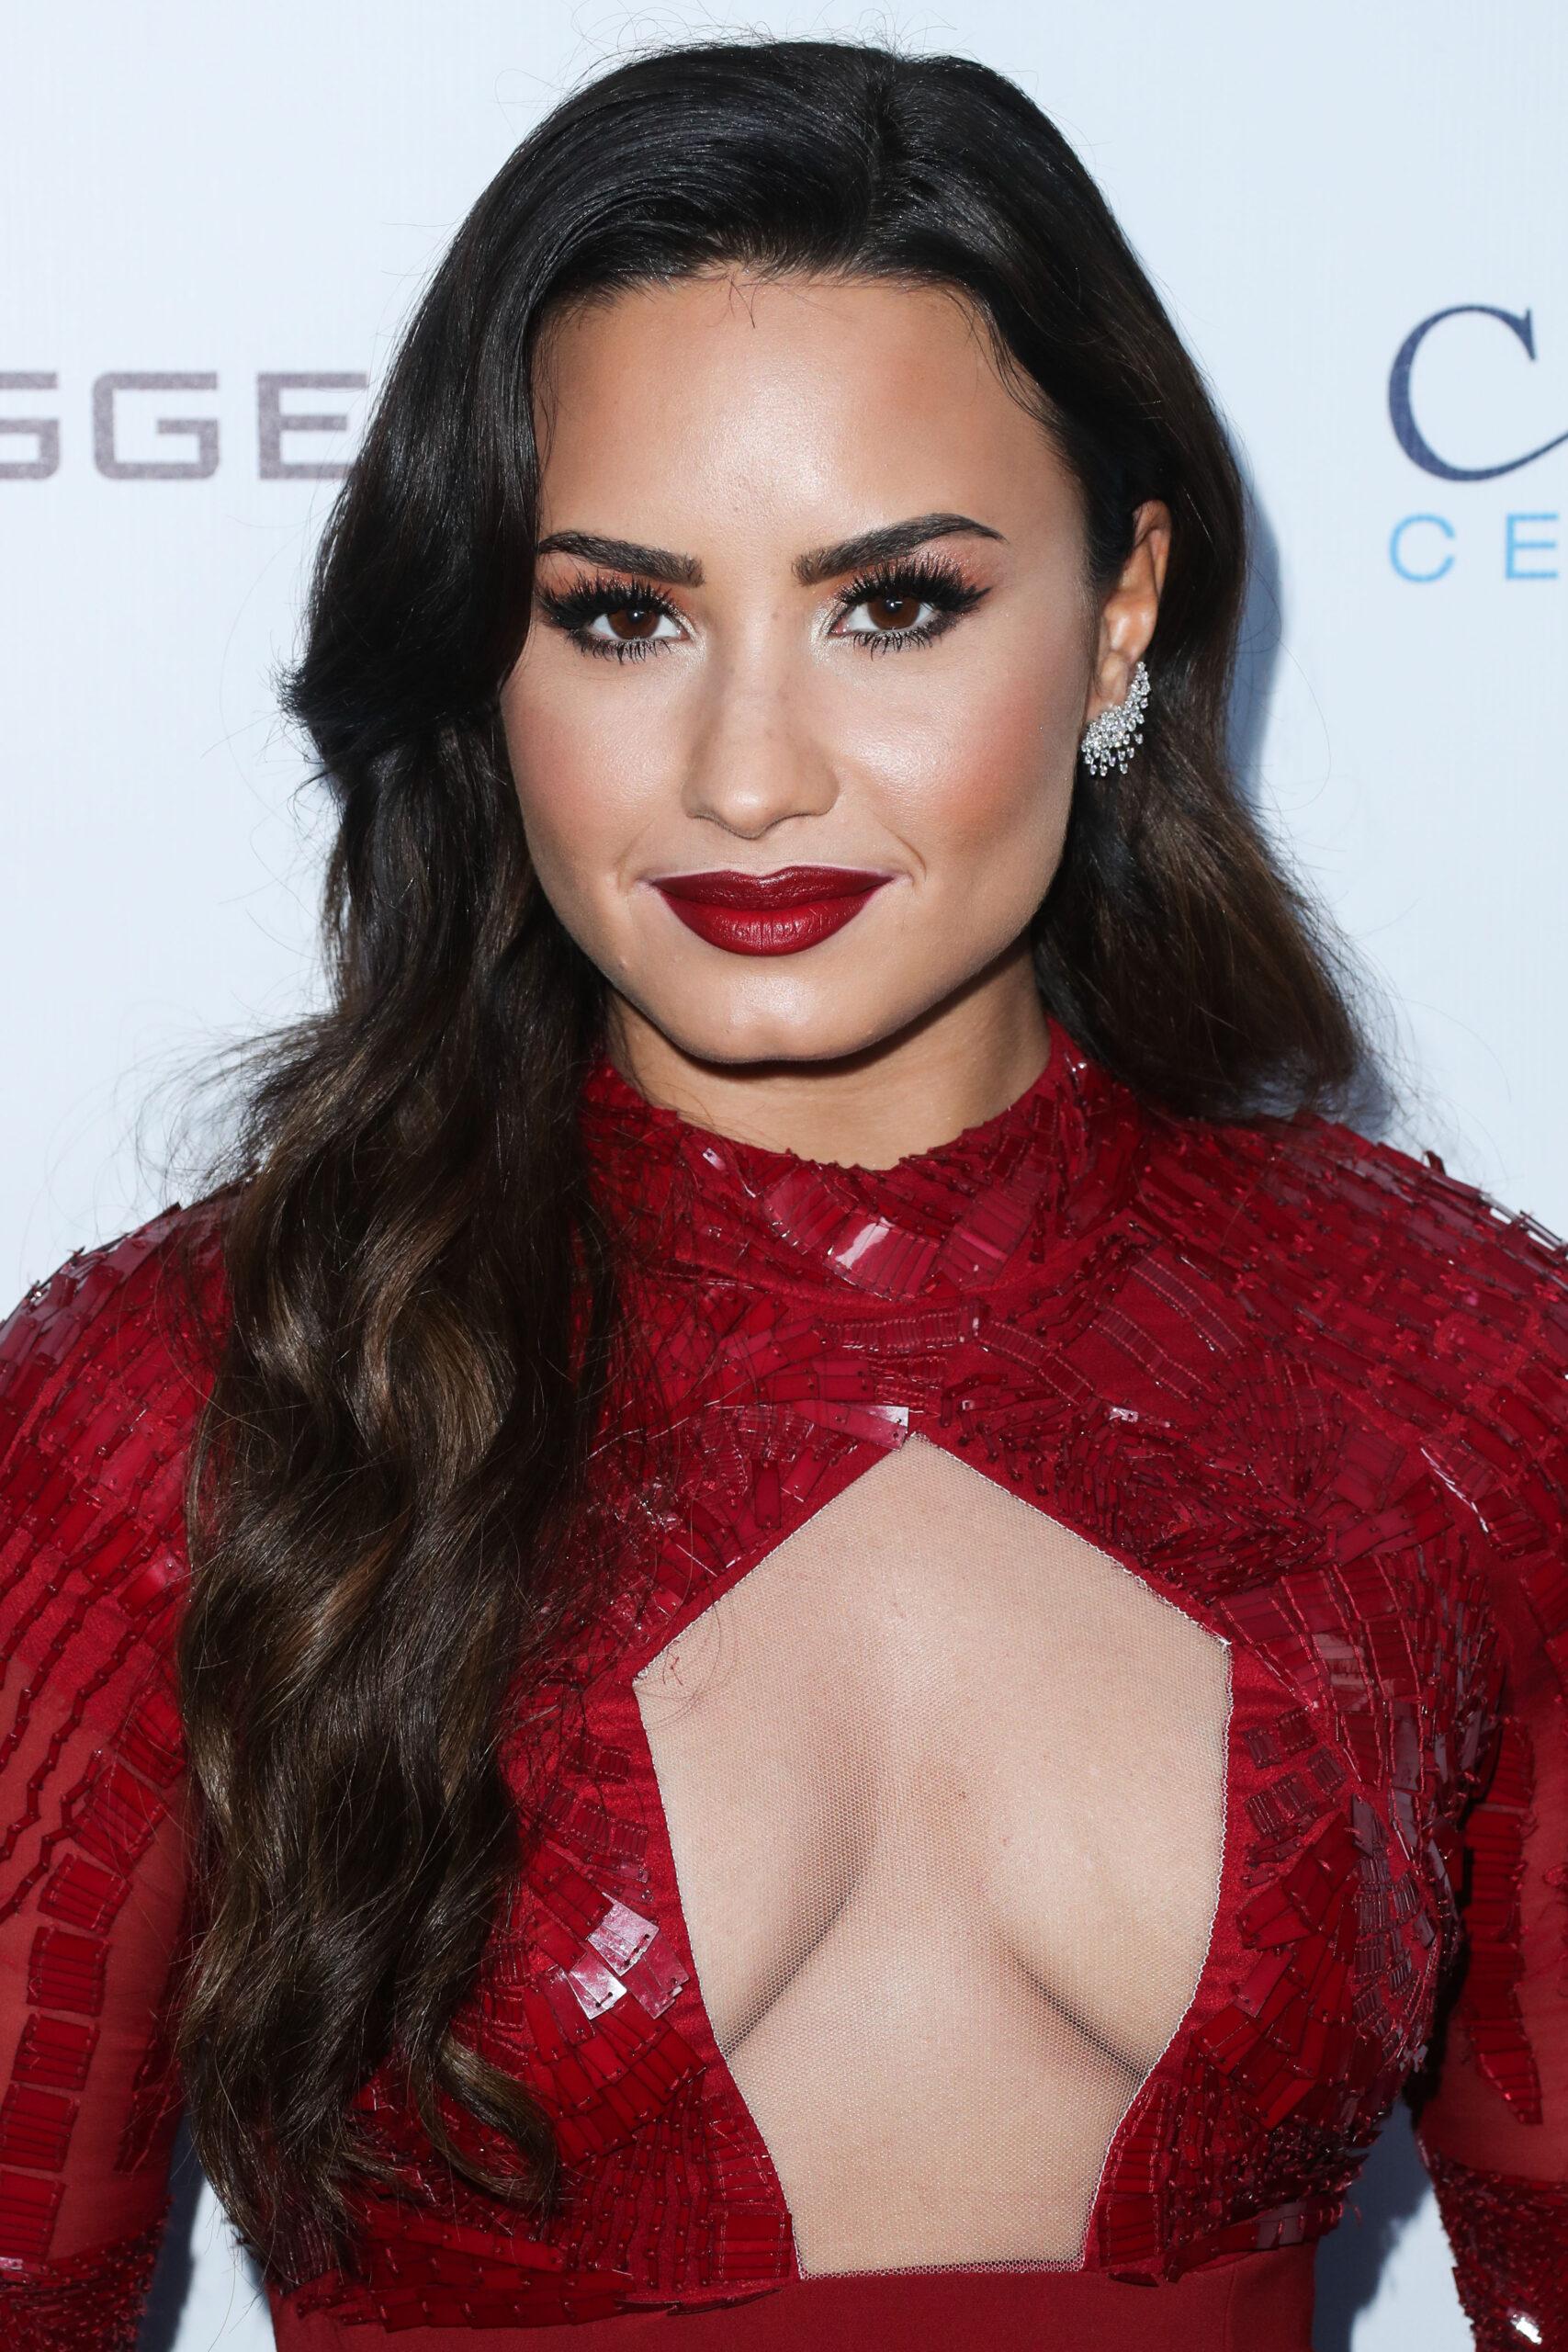 Demi Lovato at an event in a red dress